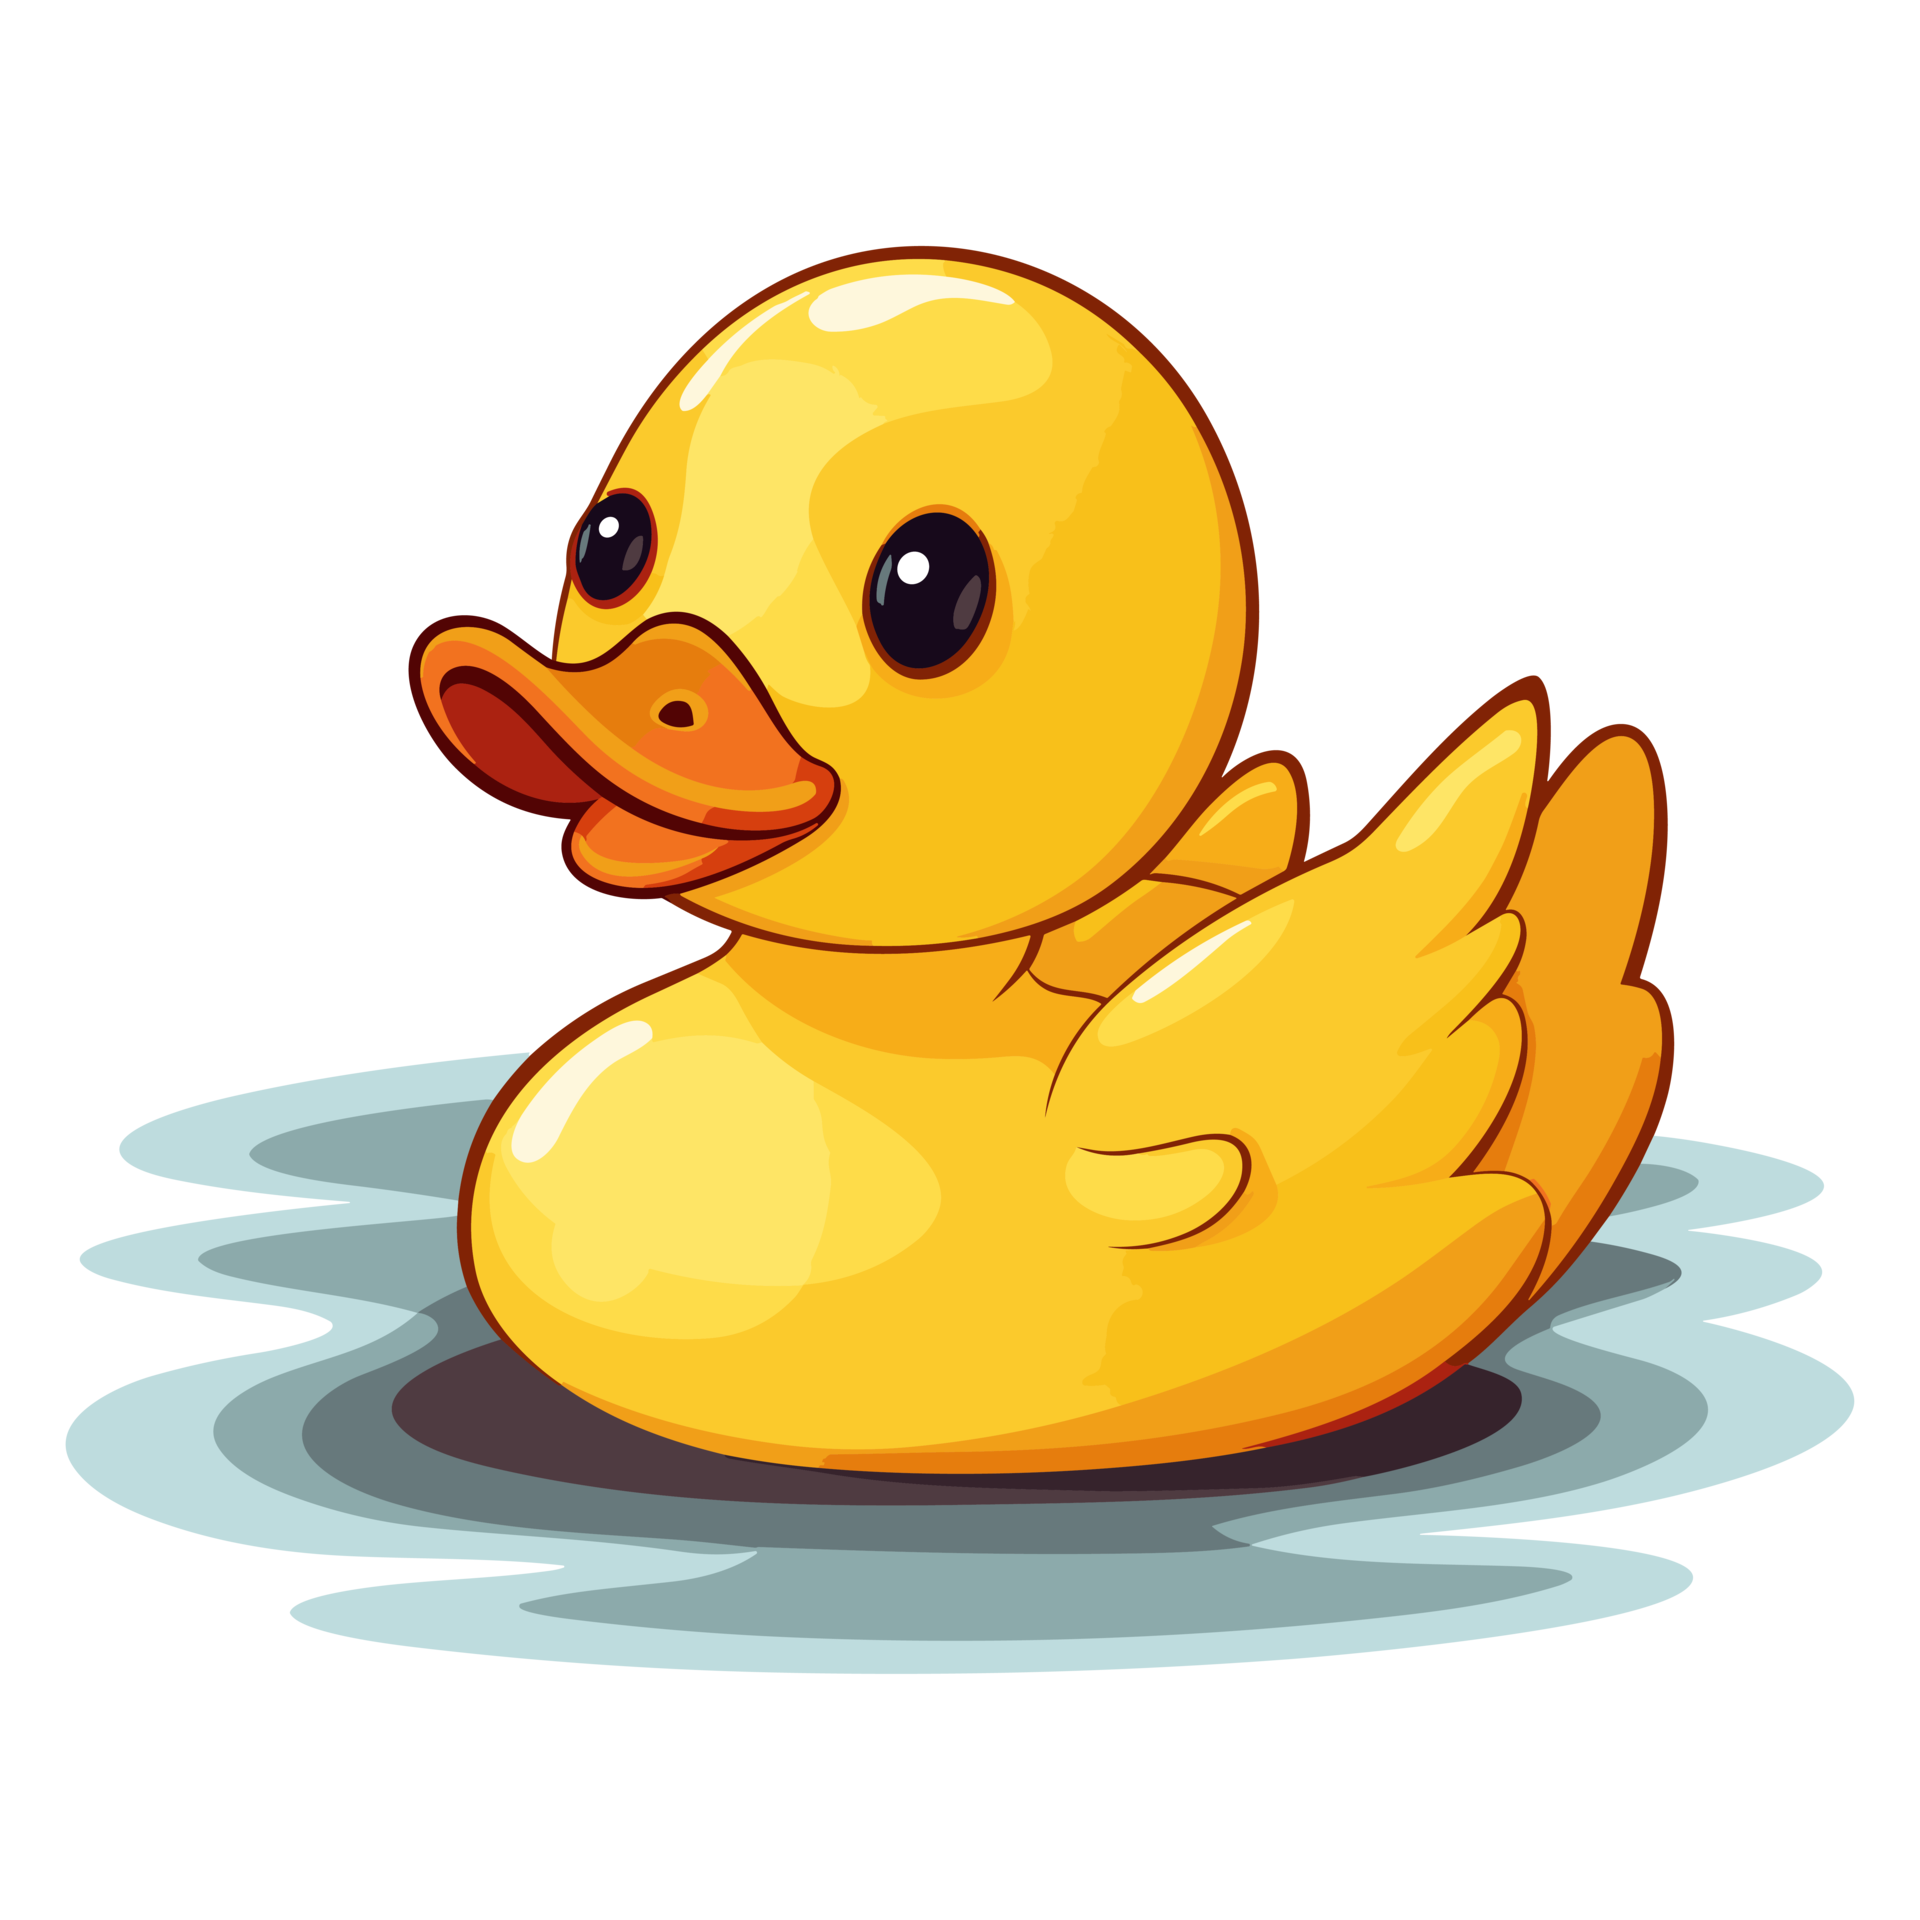 Yellow duck is bathing in a puddle, rubber bath duck illustration ...